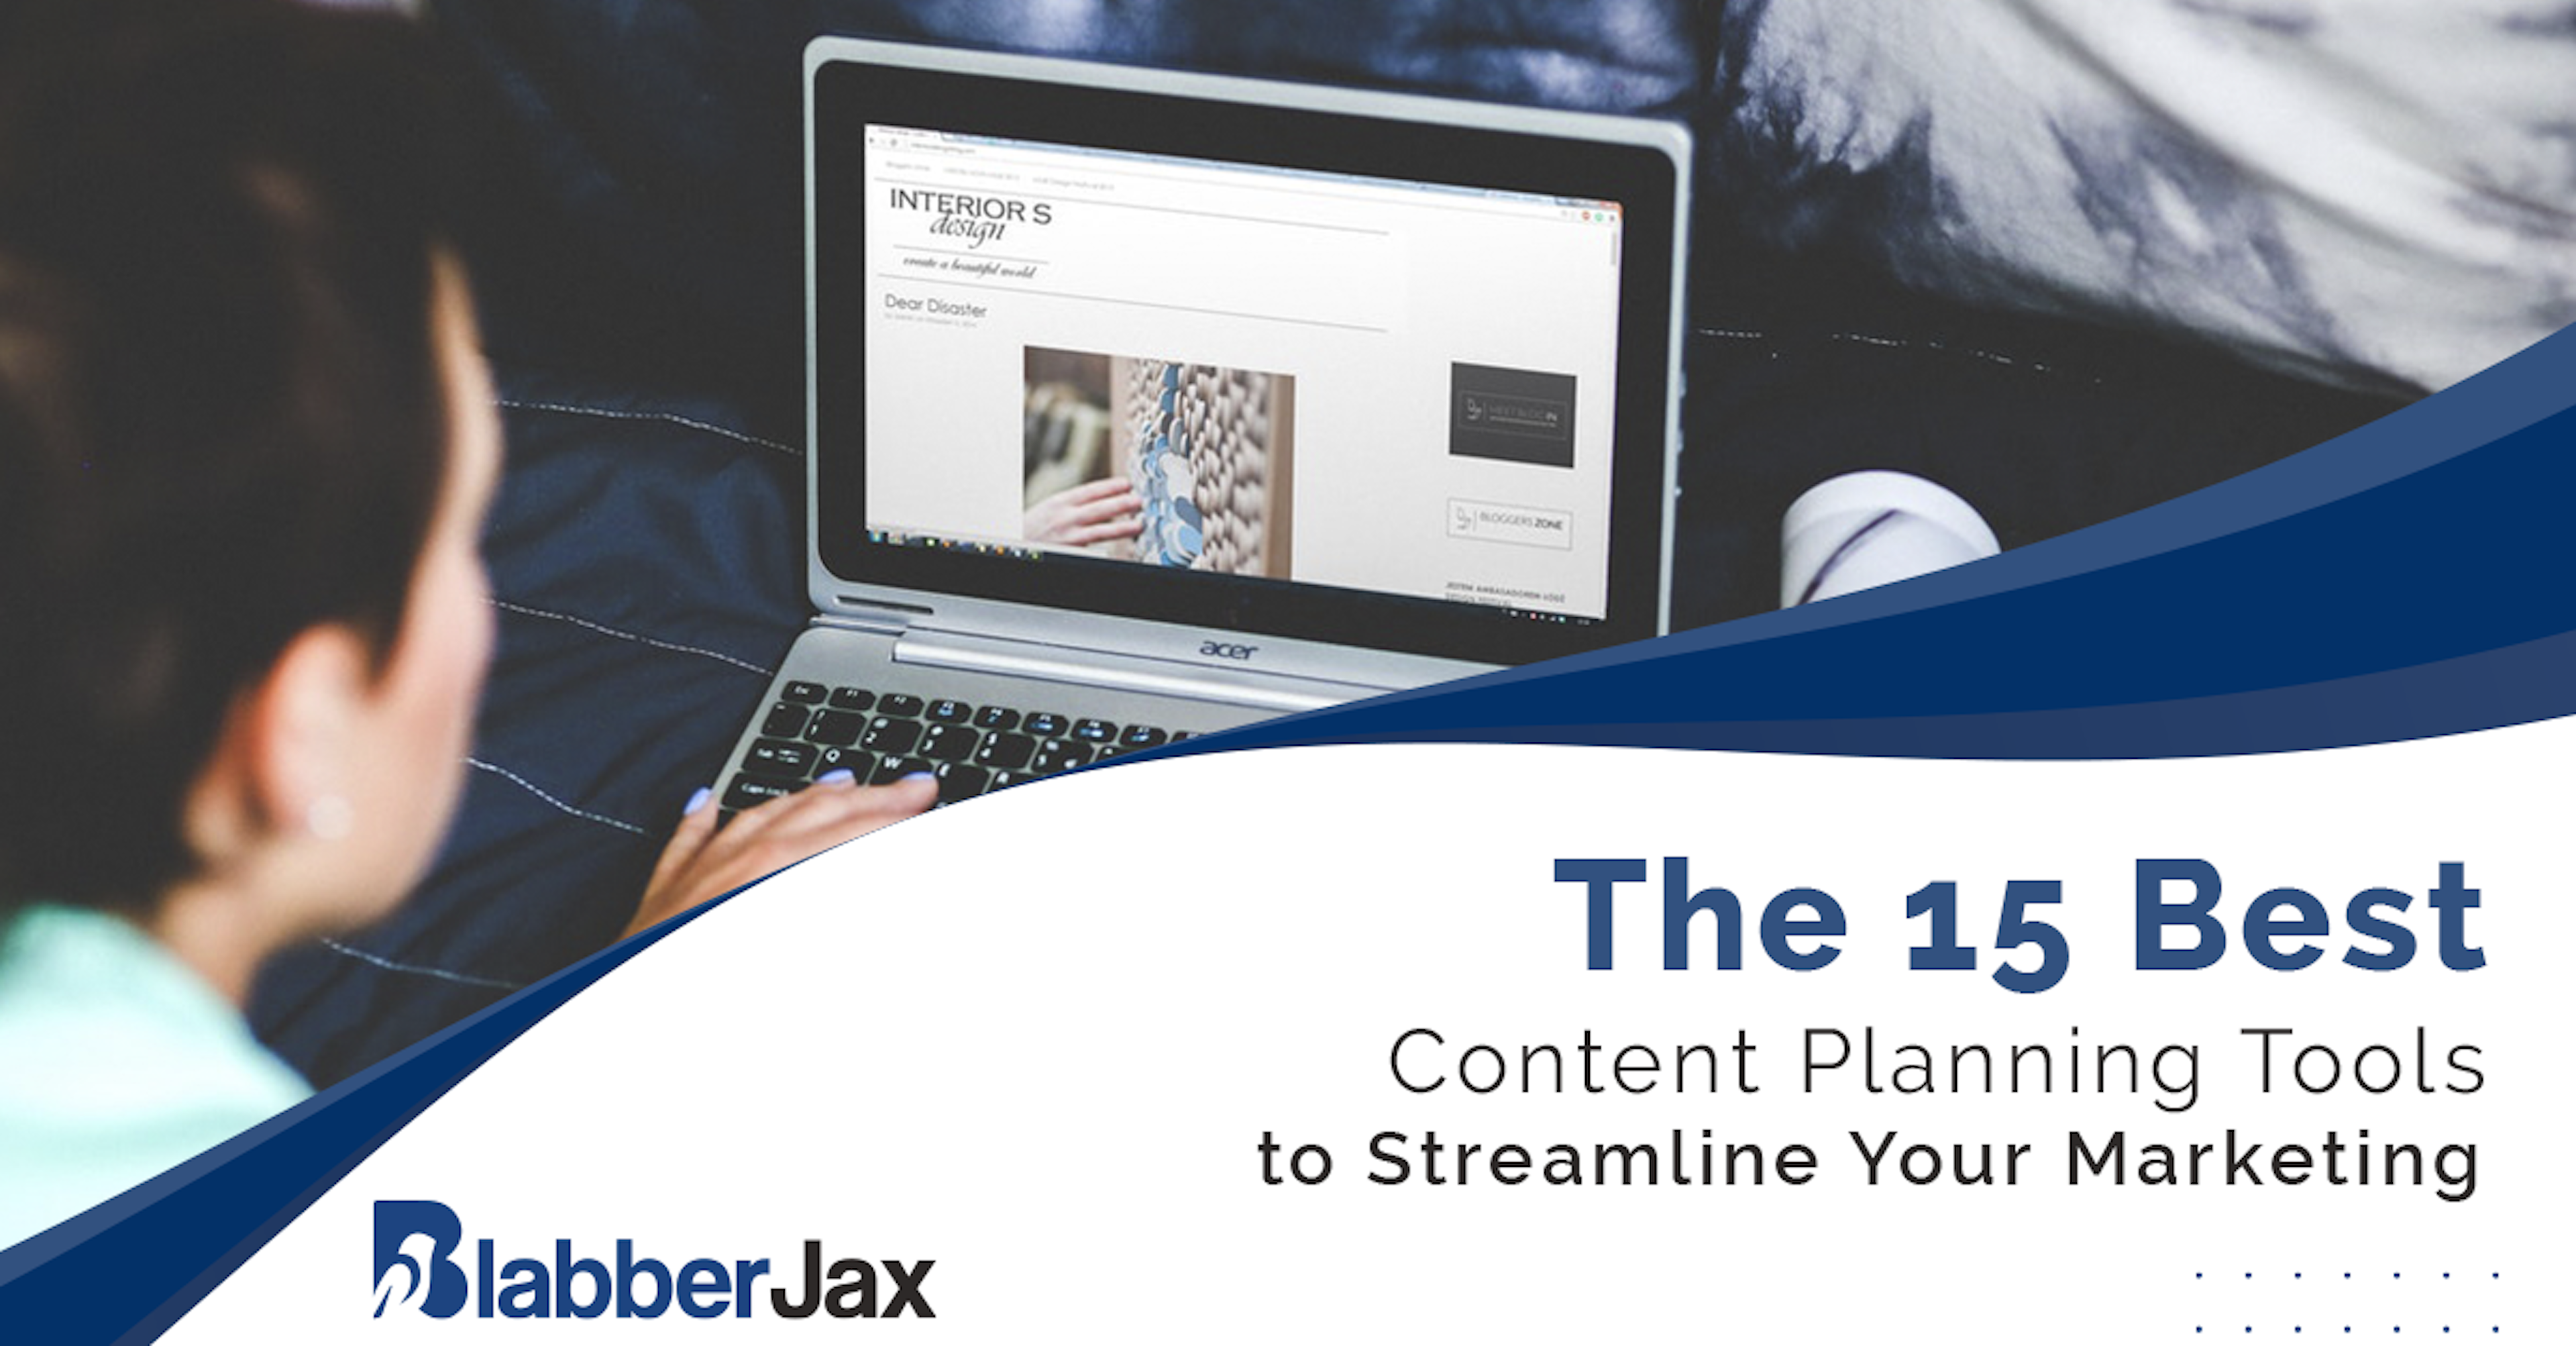 The 15 Best Content Planning Tools to Streamline Your Marketing